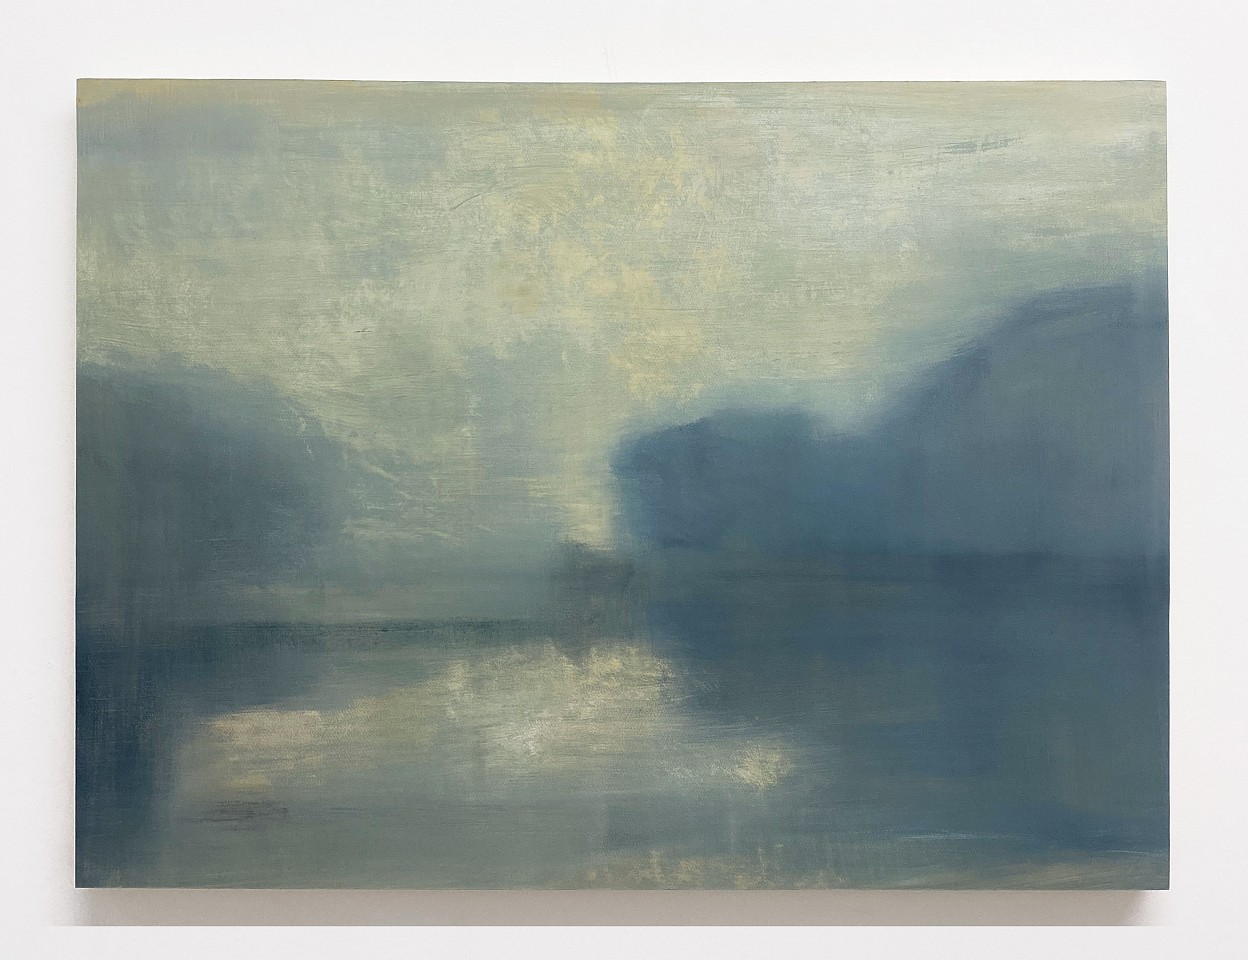 Poogy Bjerklie
Blue Morning, 2022
BJE186
oil on paper mounted on wood panel, 30 x 40 inches